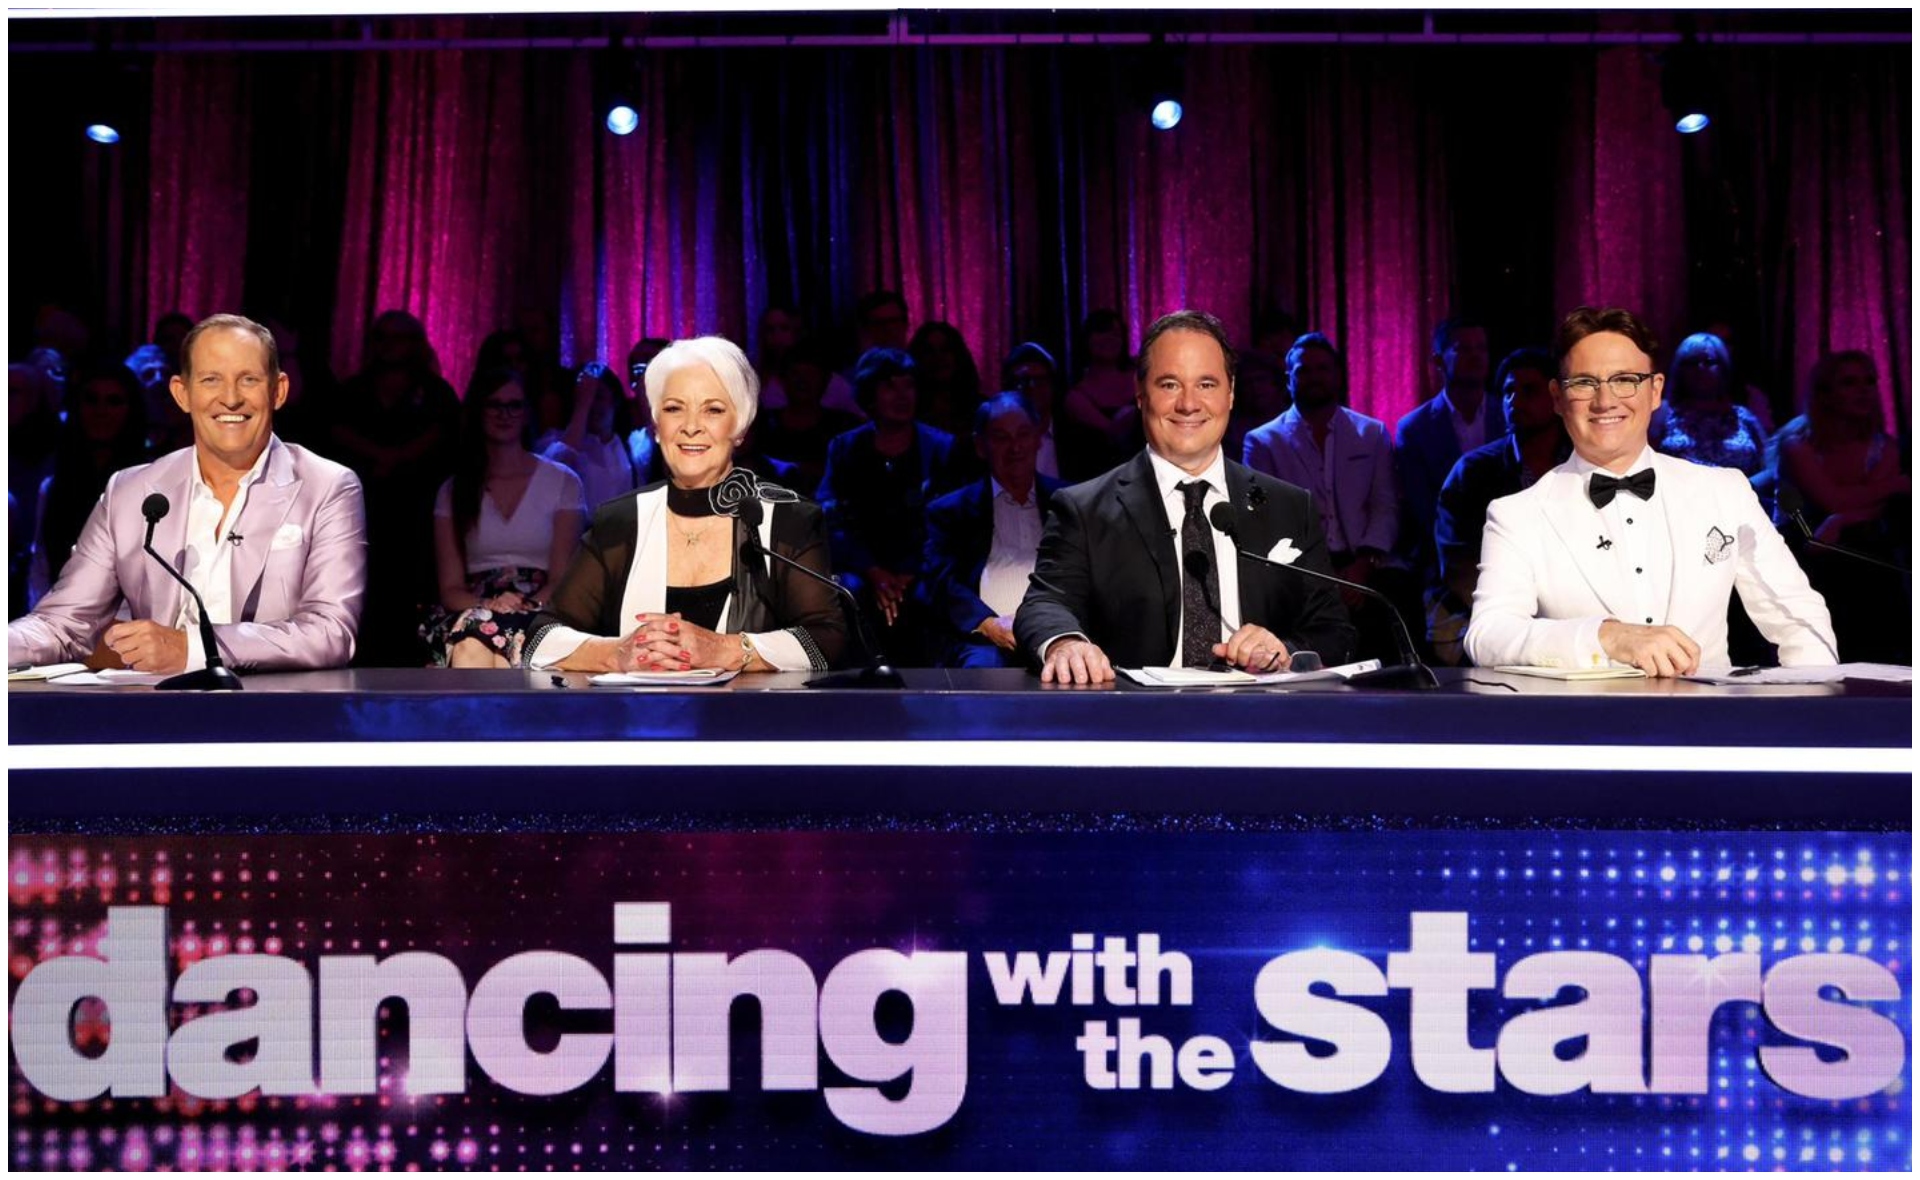 The nostalgia is real! Dancing with the Stars’ original judges take a stroll down memory lane ahead of the new season